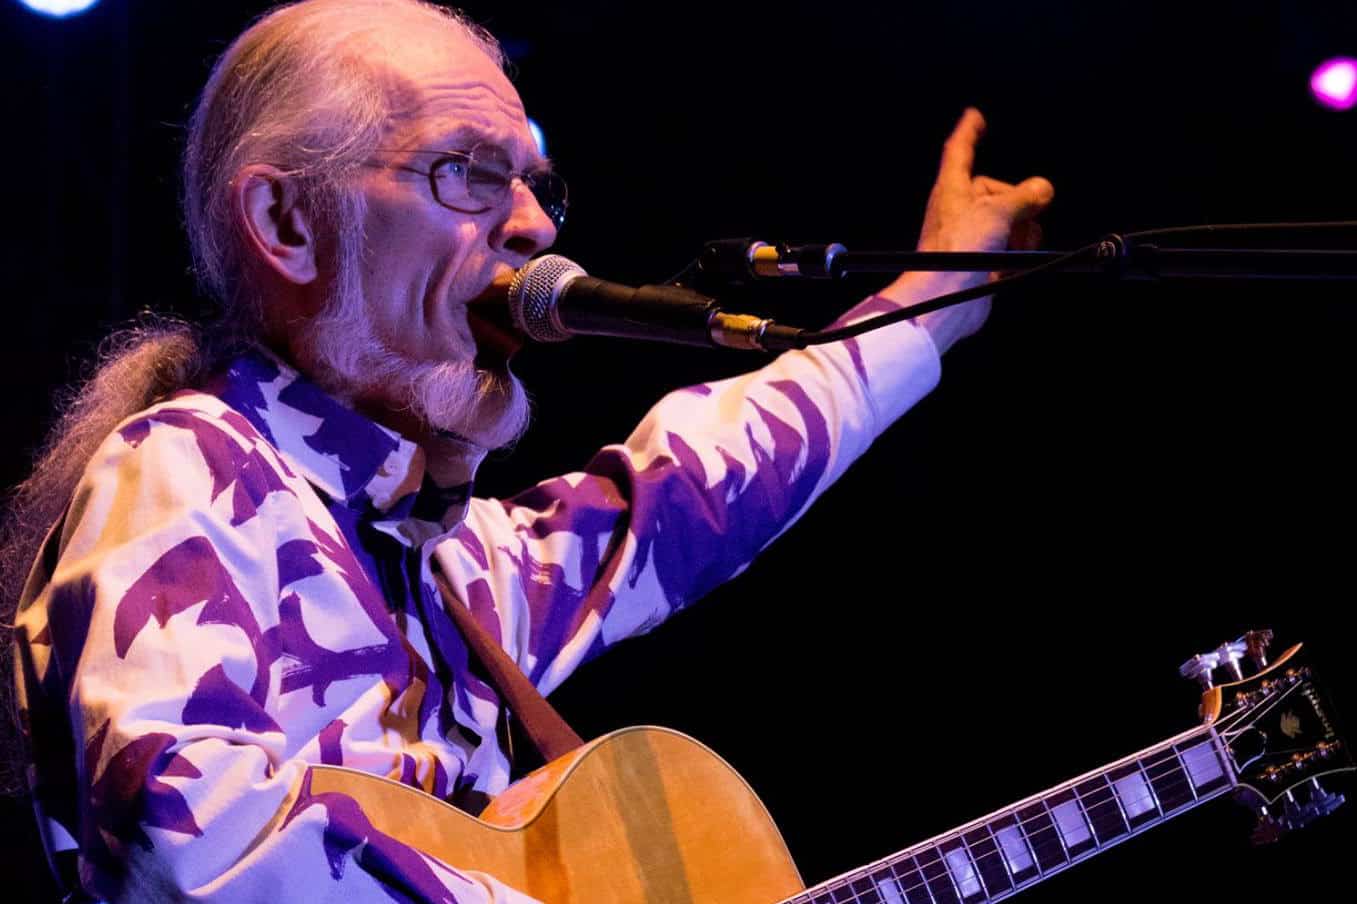 Steve Howe Brings the Past to the Present With a New Book, Album